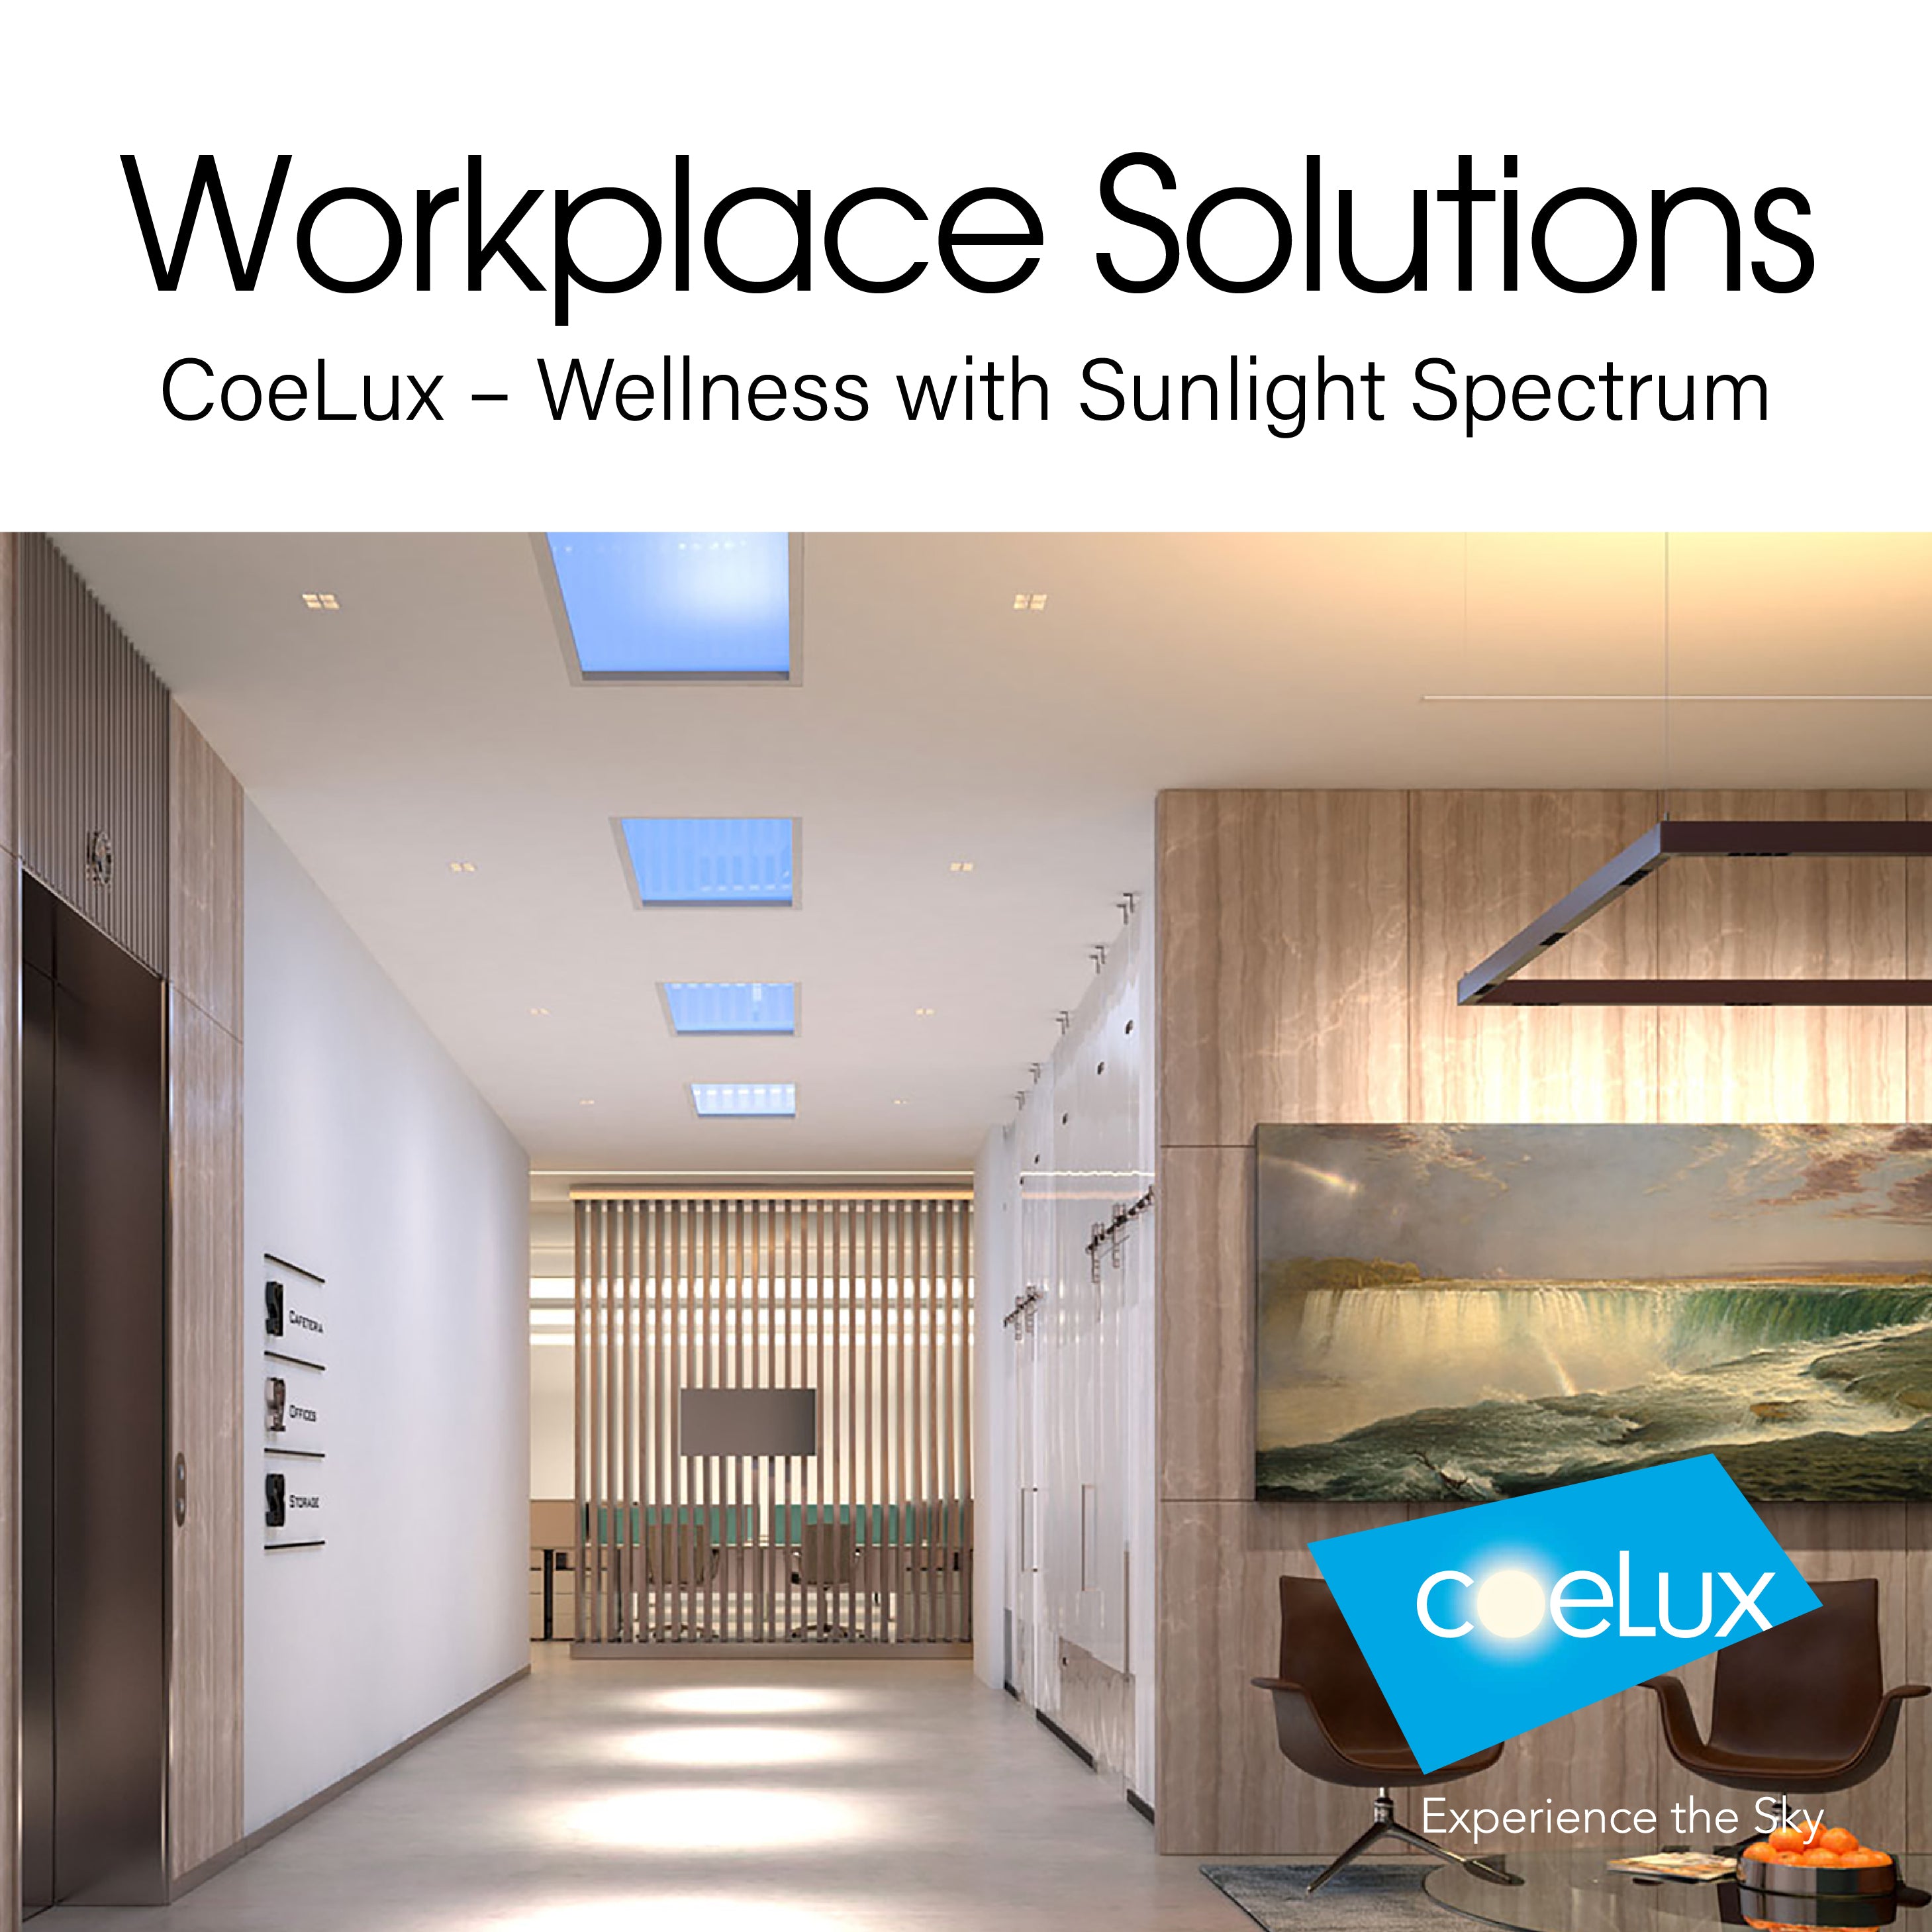 Workplace Solutions | CoeLux - Wellness with Sunlight Spectrum